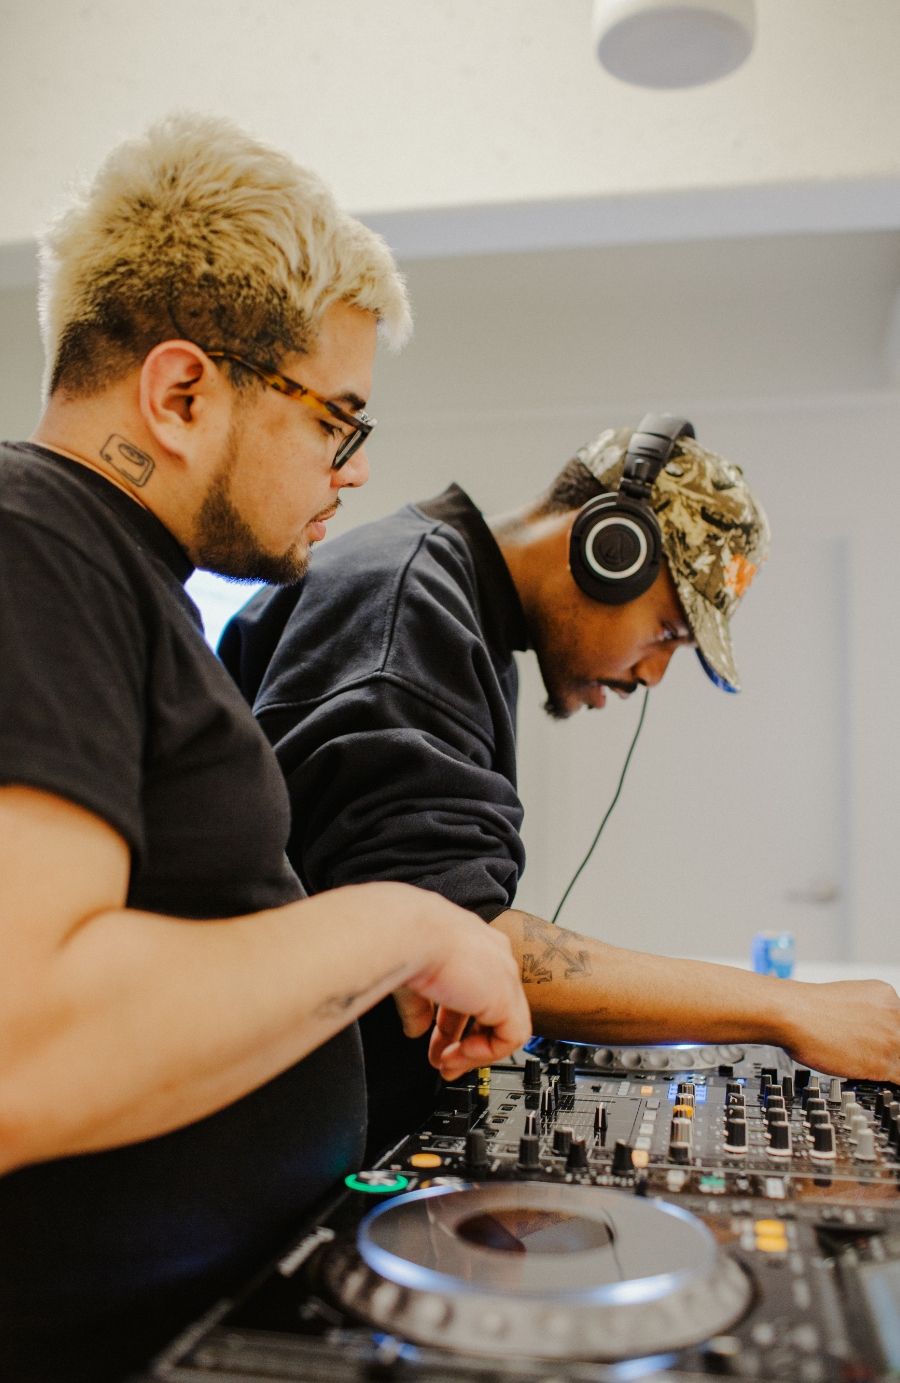 Two individuals are DJing. One is operating the mixer, while the other, wearing headphones, adjusts settings on the equipment.